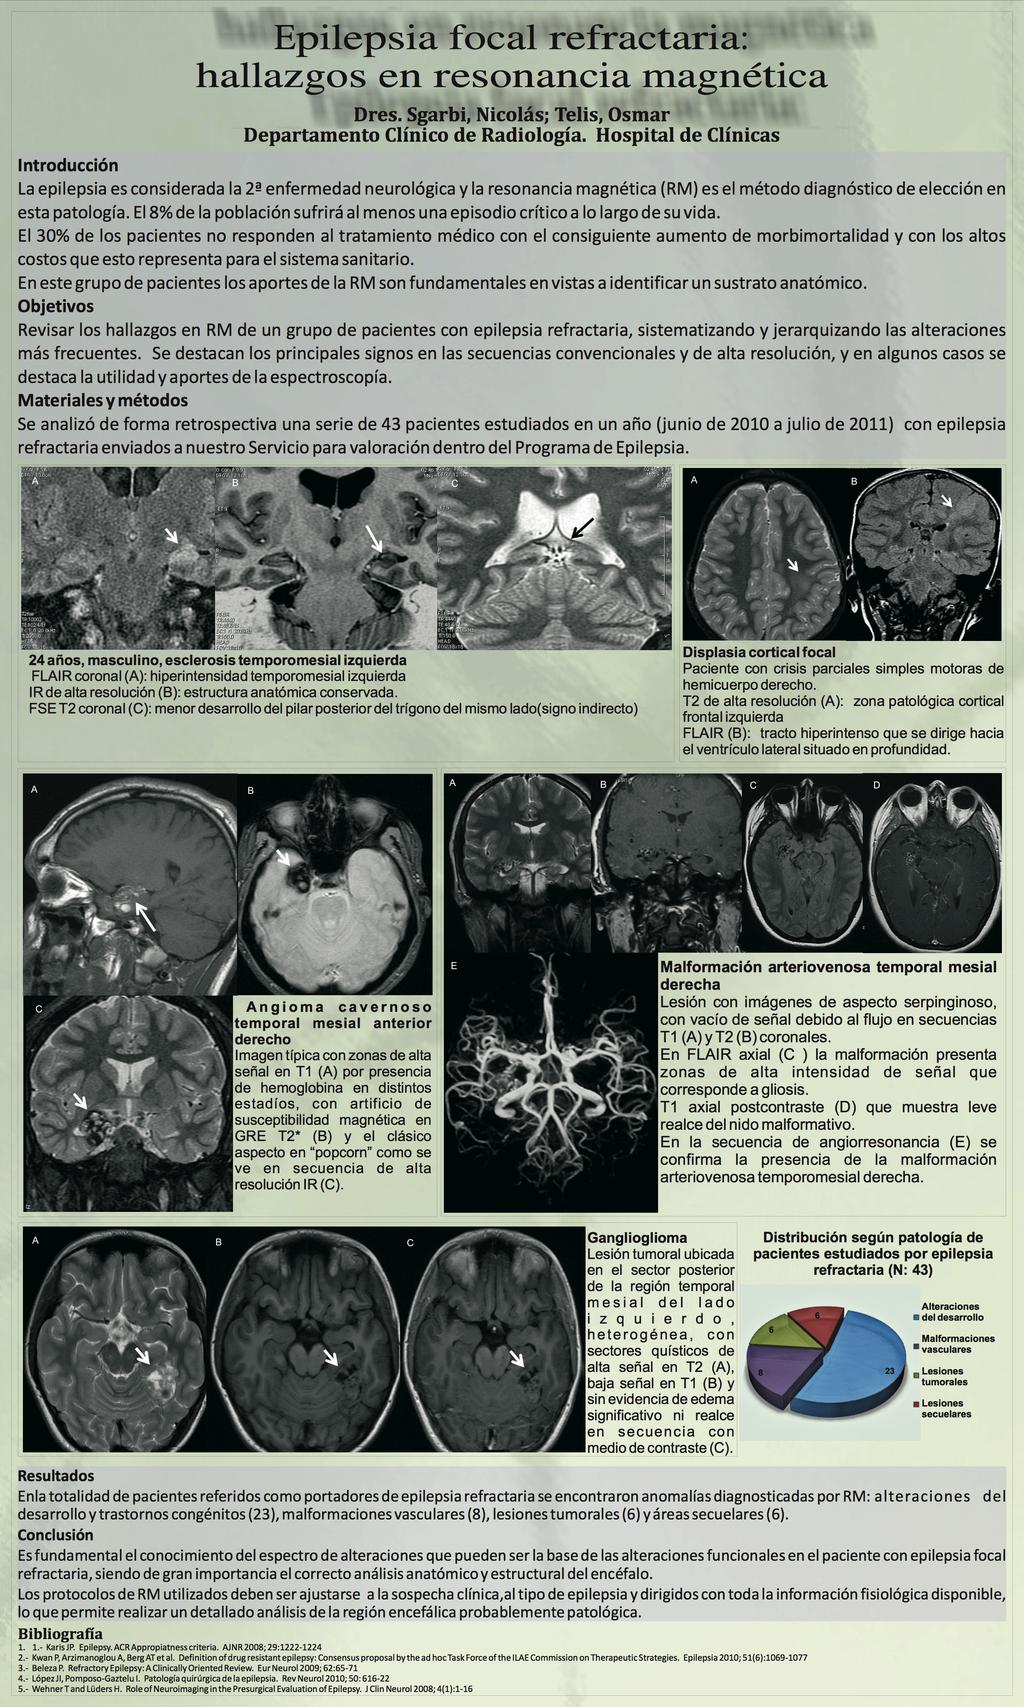 Refractory focal epilepsy: findings by MRI.